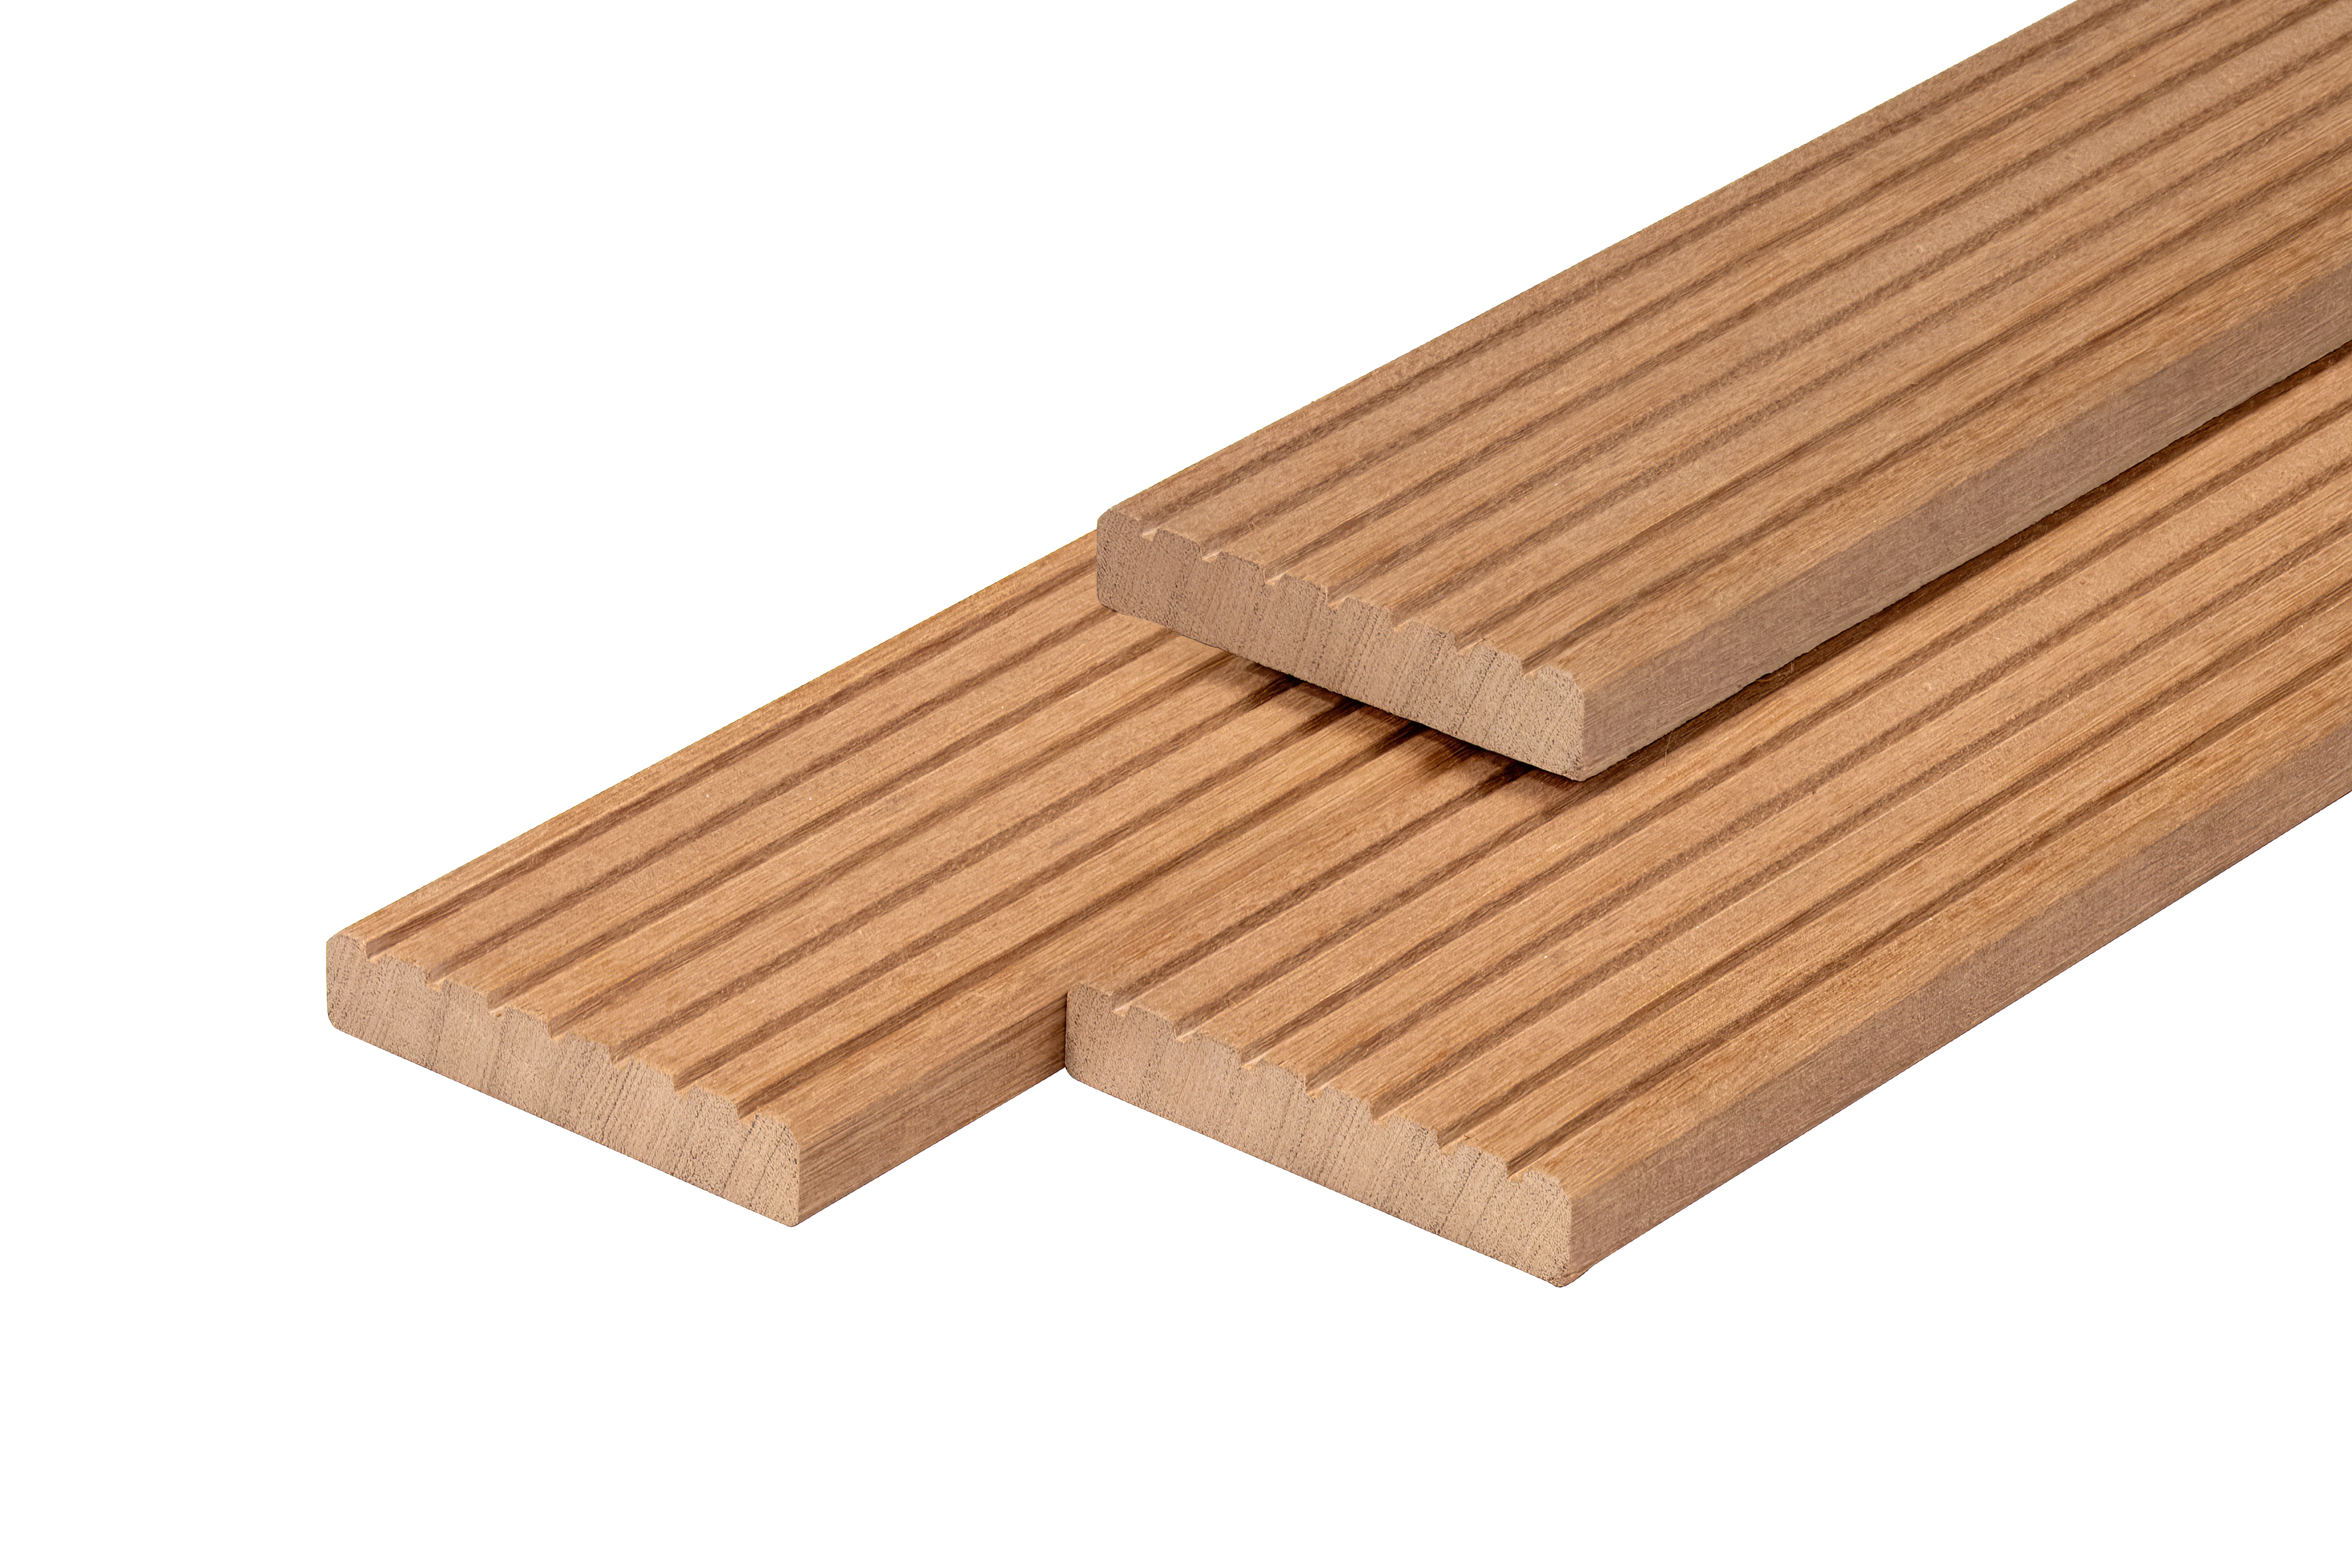 Bangkirai decking board dried 2.5x14.5x275 cm planed 7 grooves + 1 side smooth